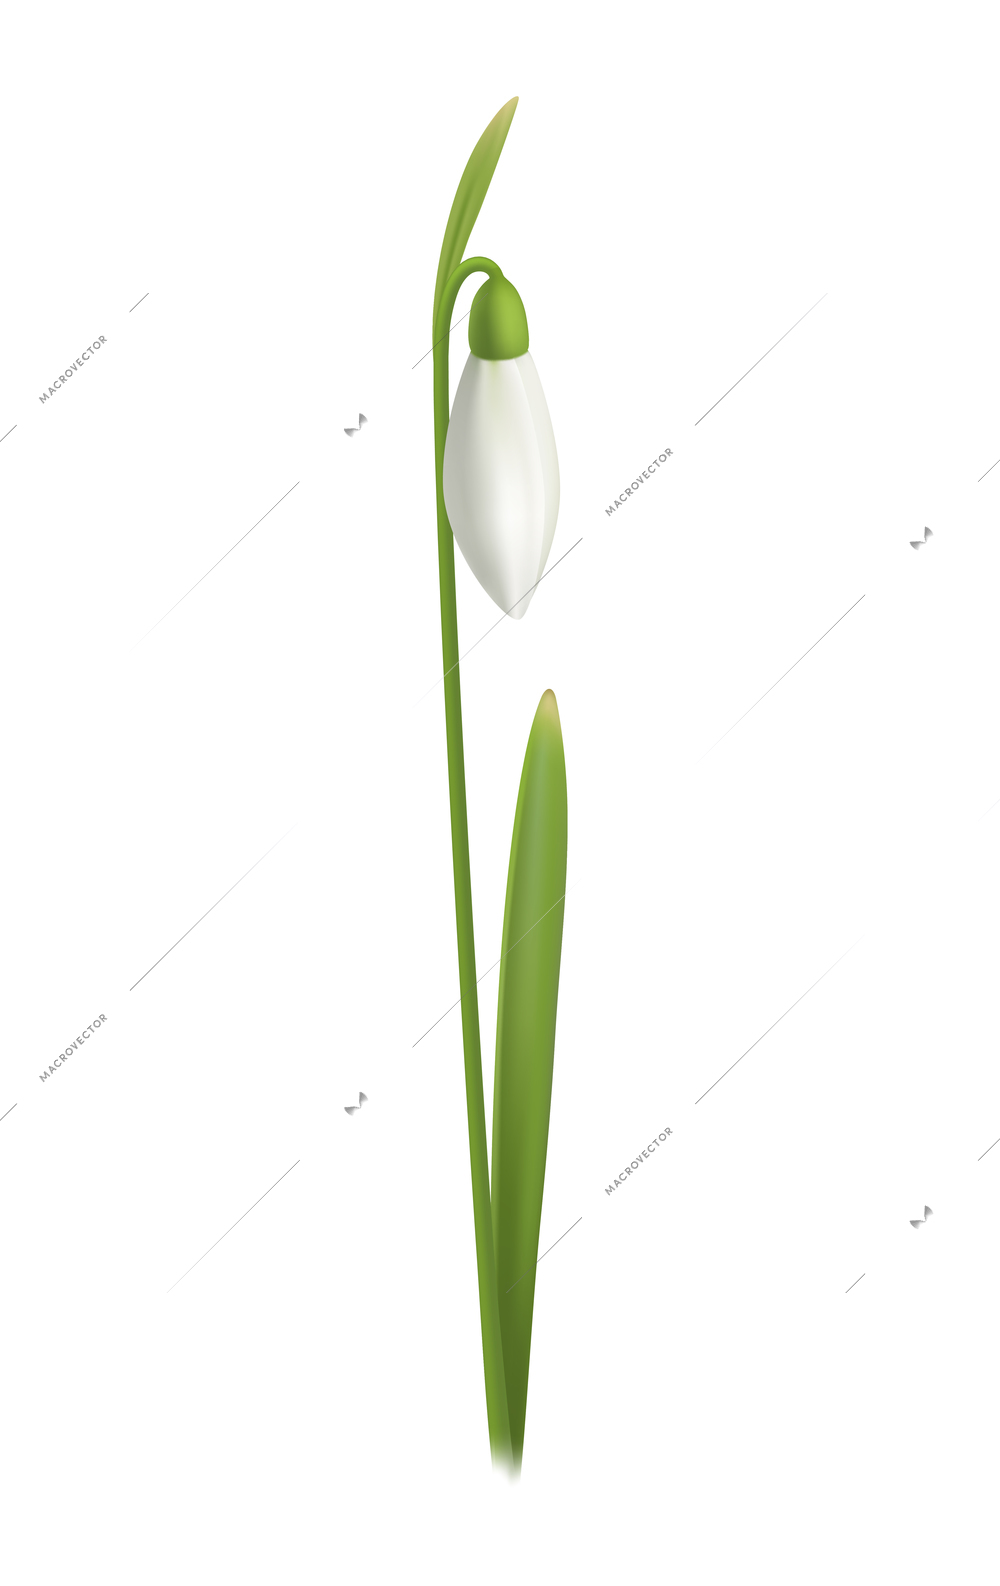 Realistic snowdrop flower with green leaf on white background vector illustration